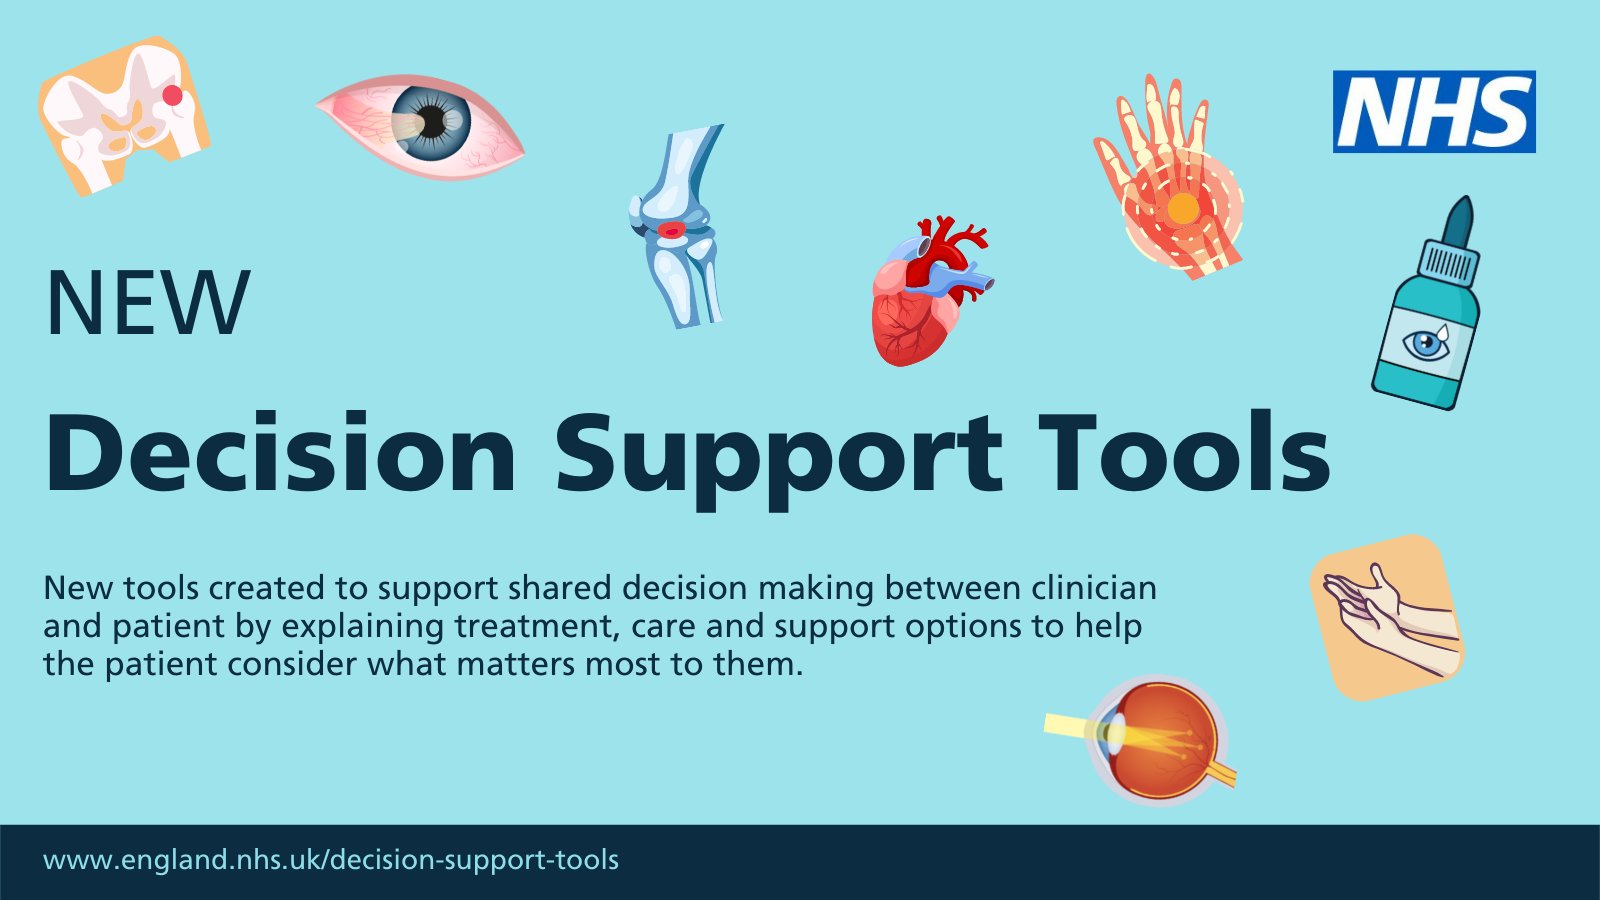 Shared decision making tools